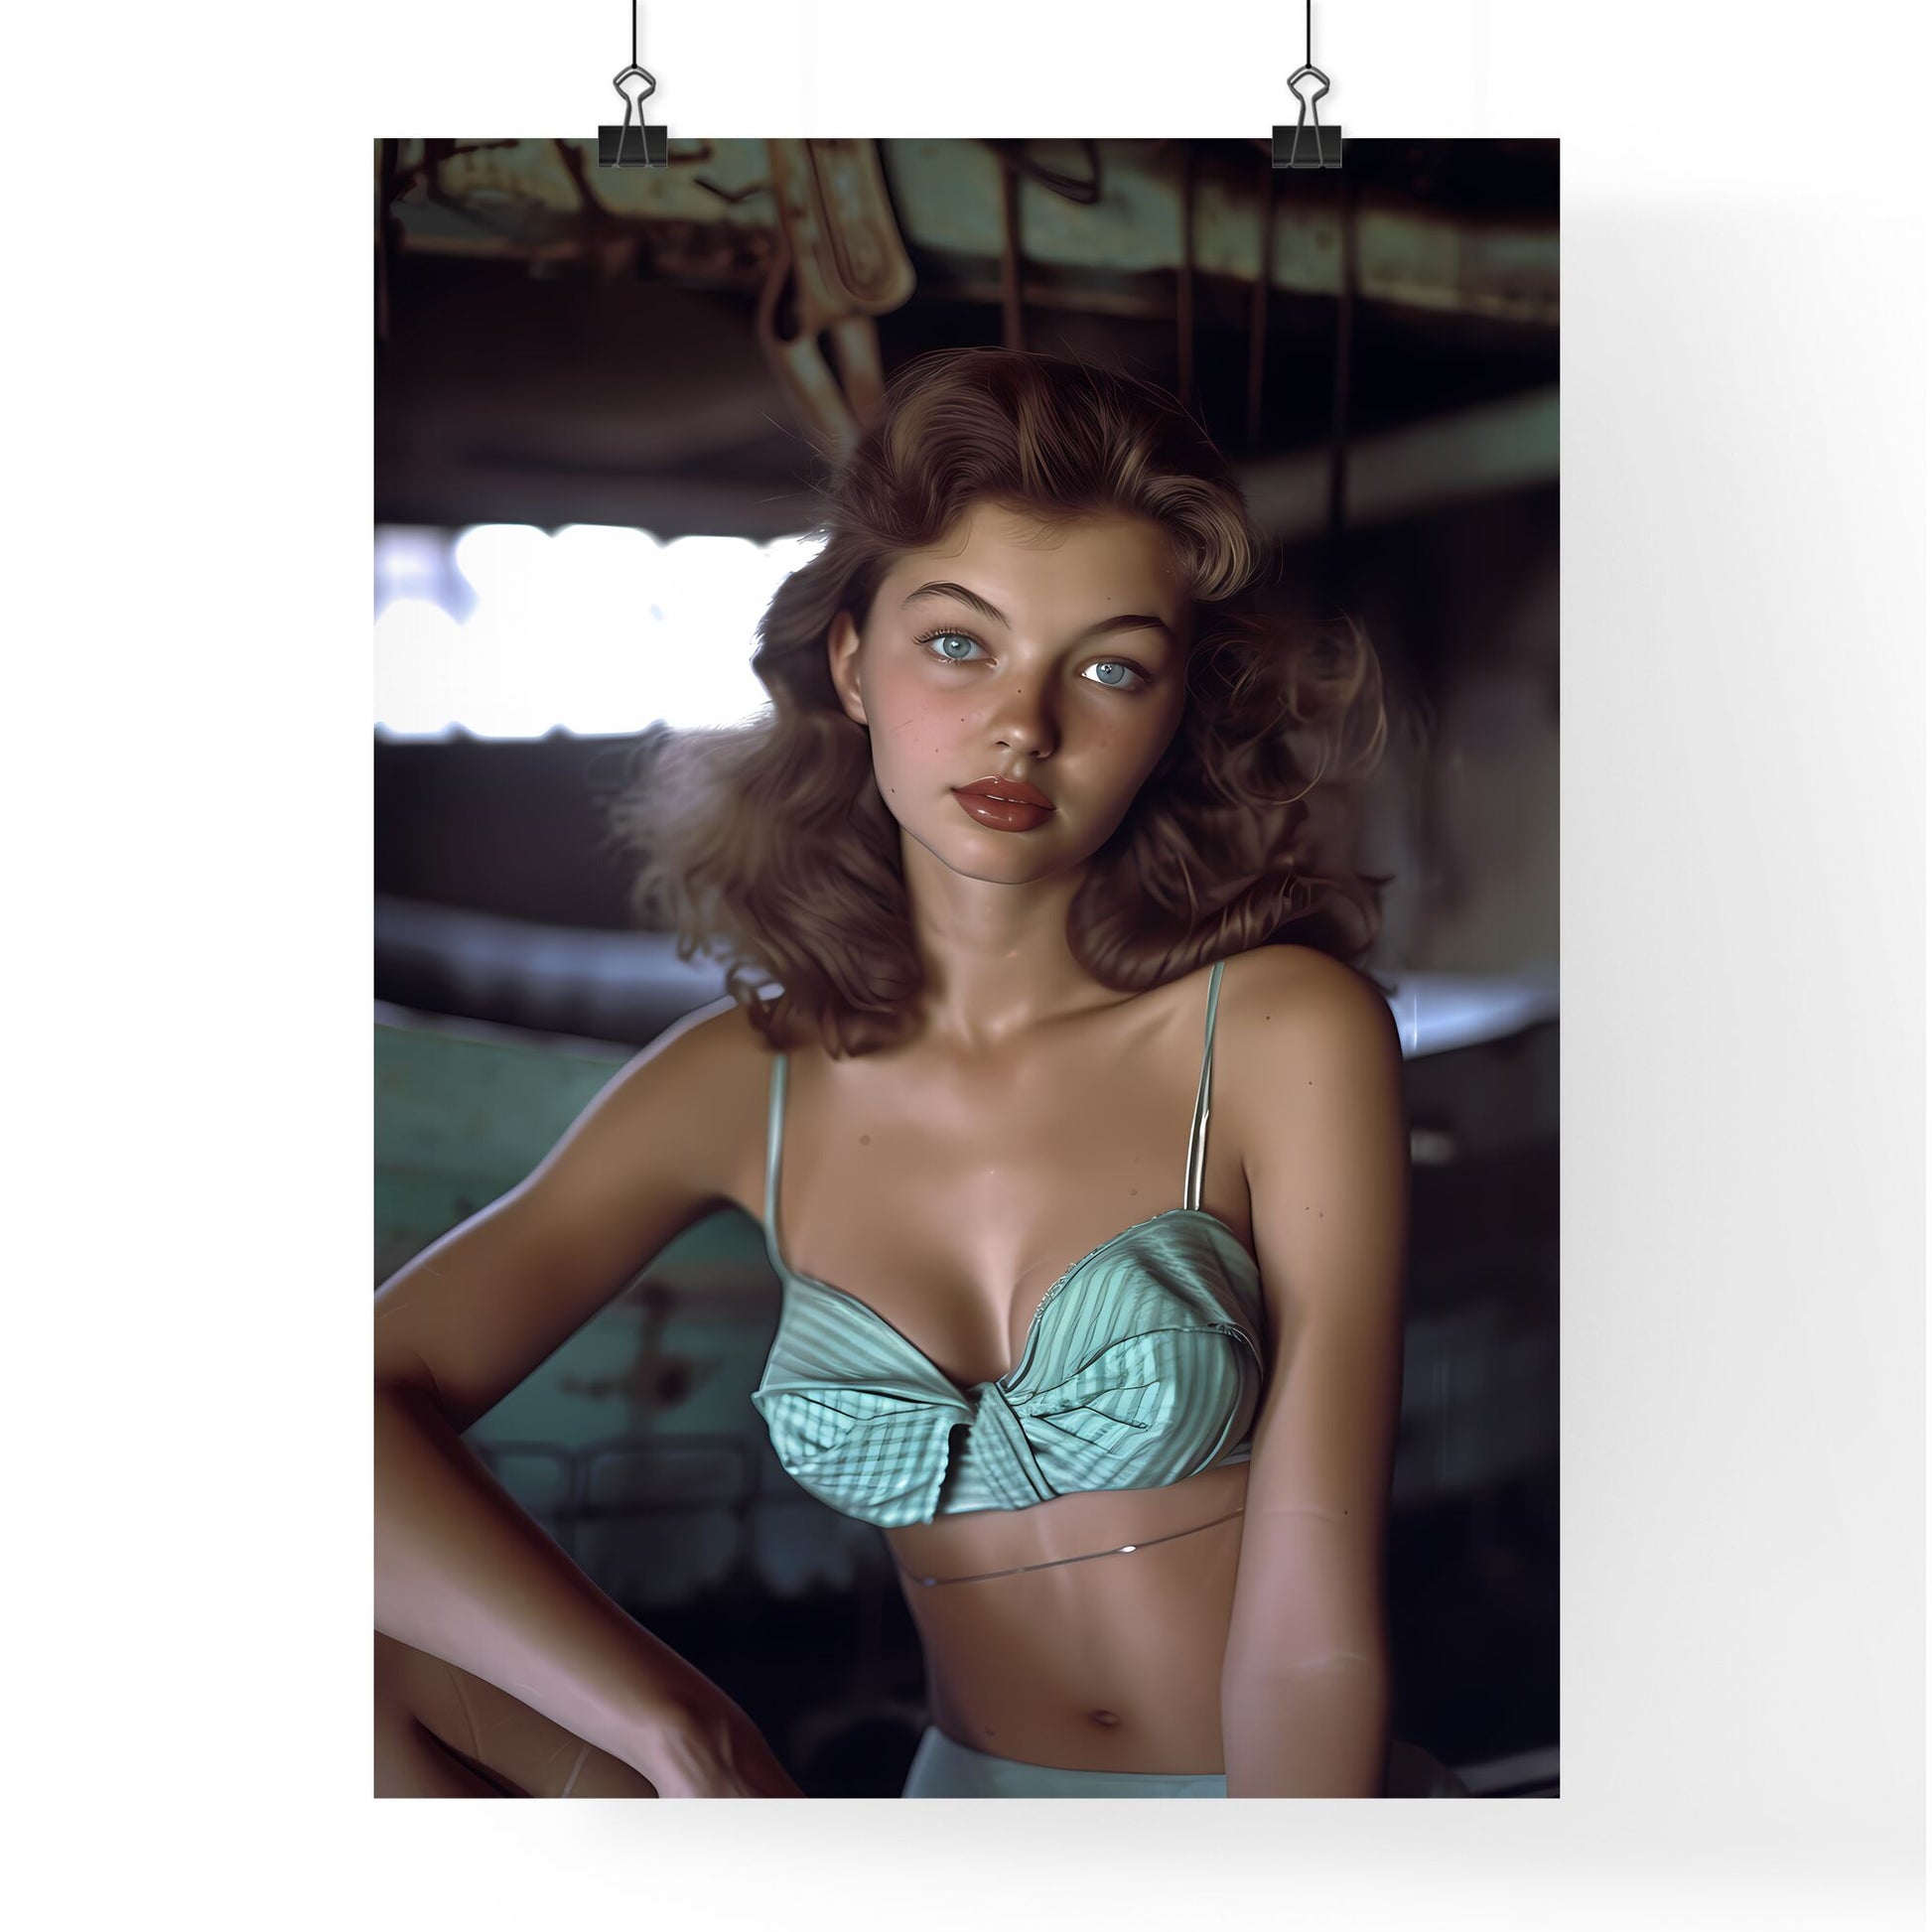 Sitting pin up factory worker girl,looking amazing - Art print of a woman in a garment Default Title